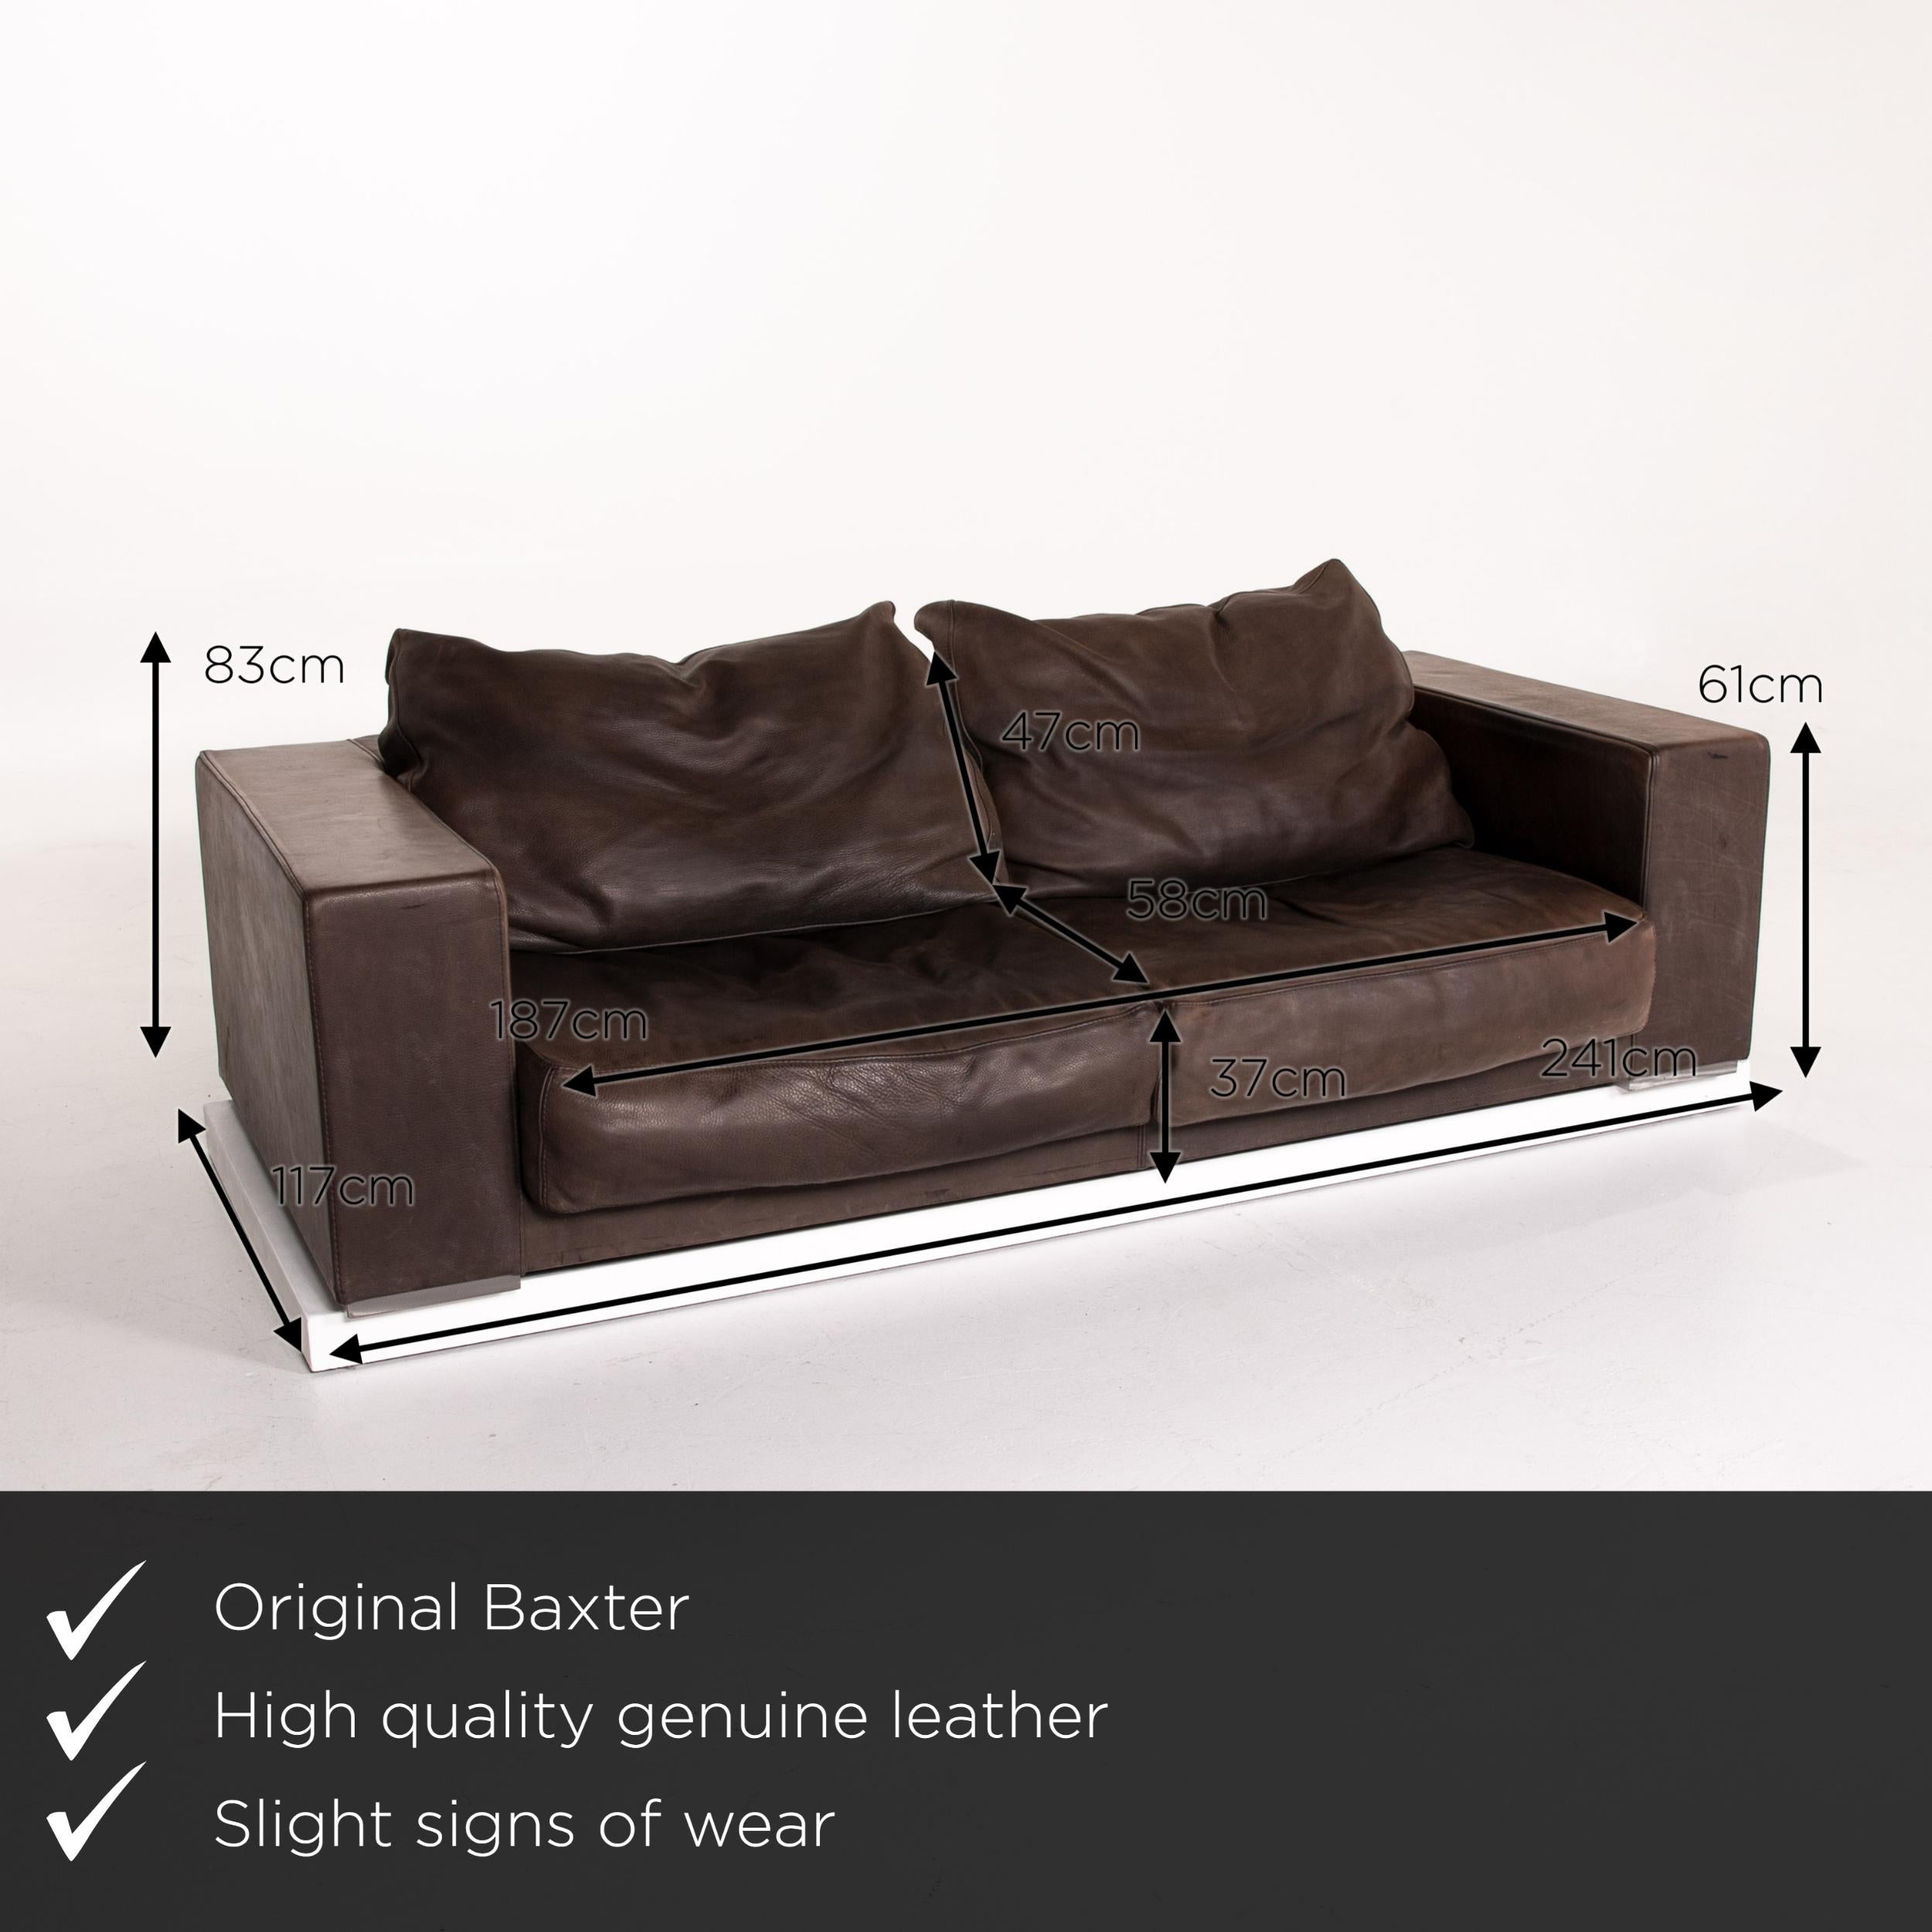 We present to you a Baxter Budapest leather sofa brown two-seat couch 14016.
 

 Product measurements in centimeters:
 

Depth 117
Width 241
Height 83
Seat height 37
Rest height 61
Seat depth 58
Seat width 187
Back height 47.
 